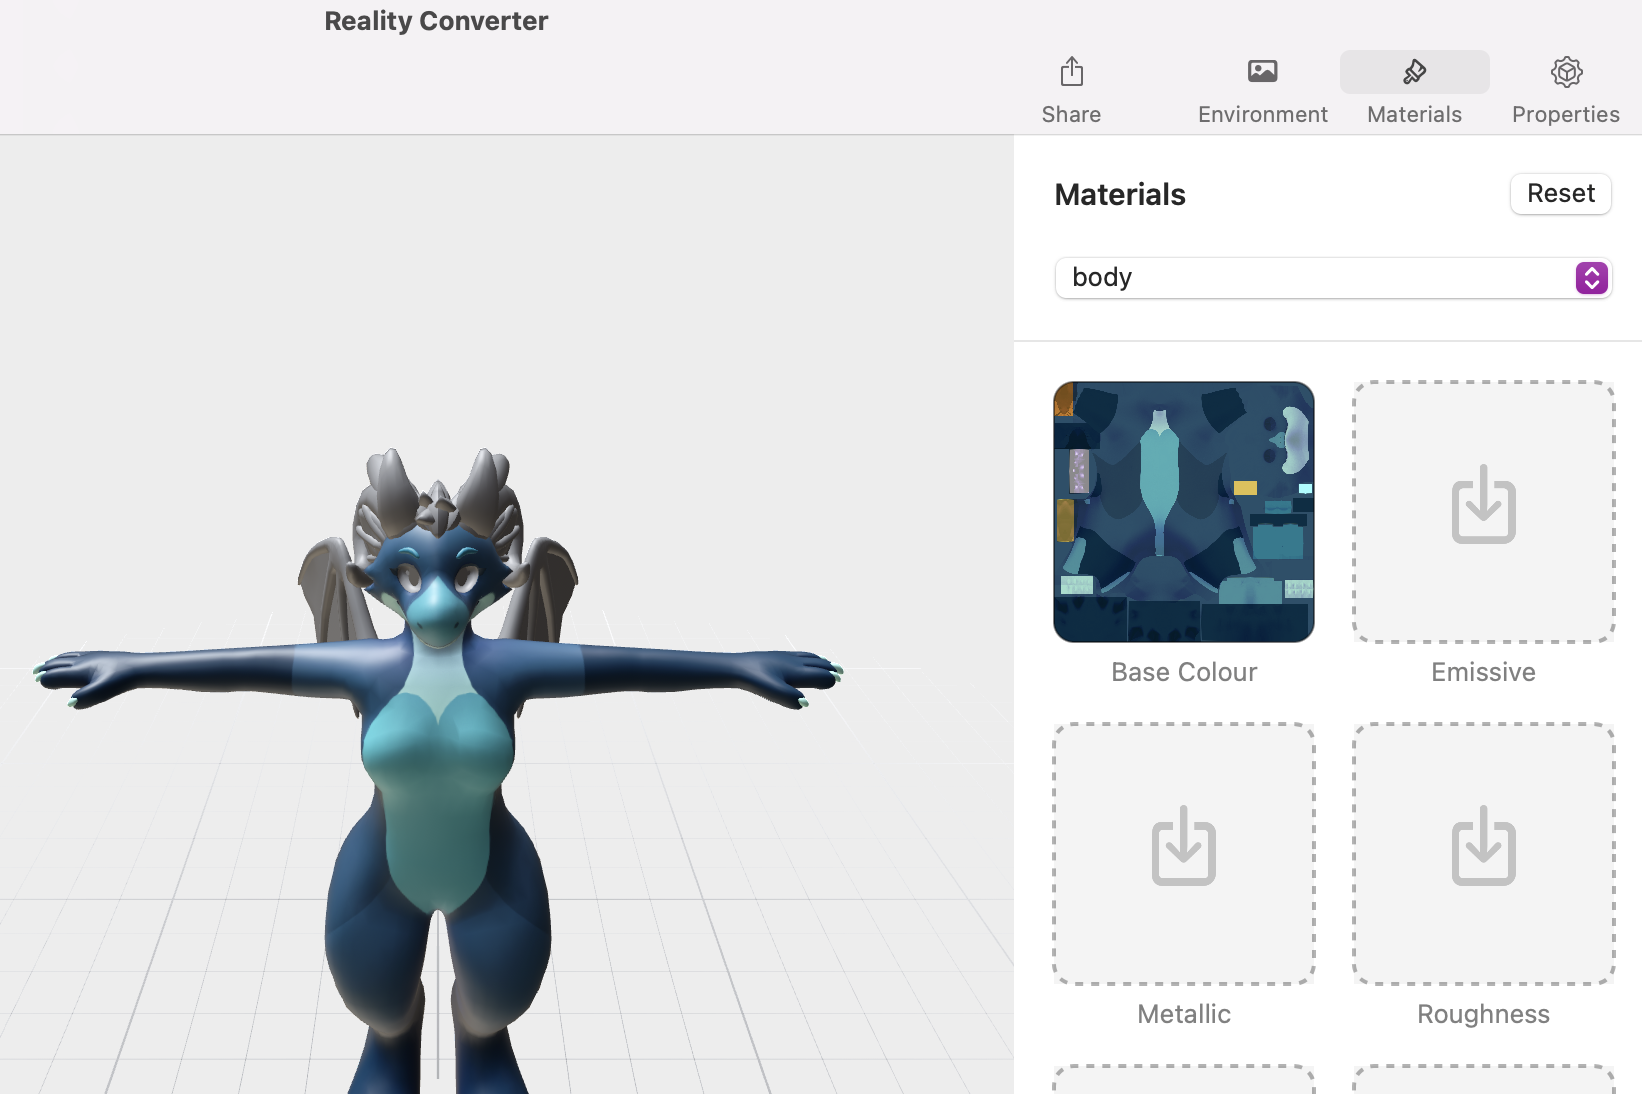 Reality Converter showing a blue dragon avatar with the body base colour applied